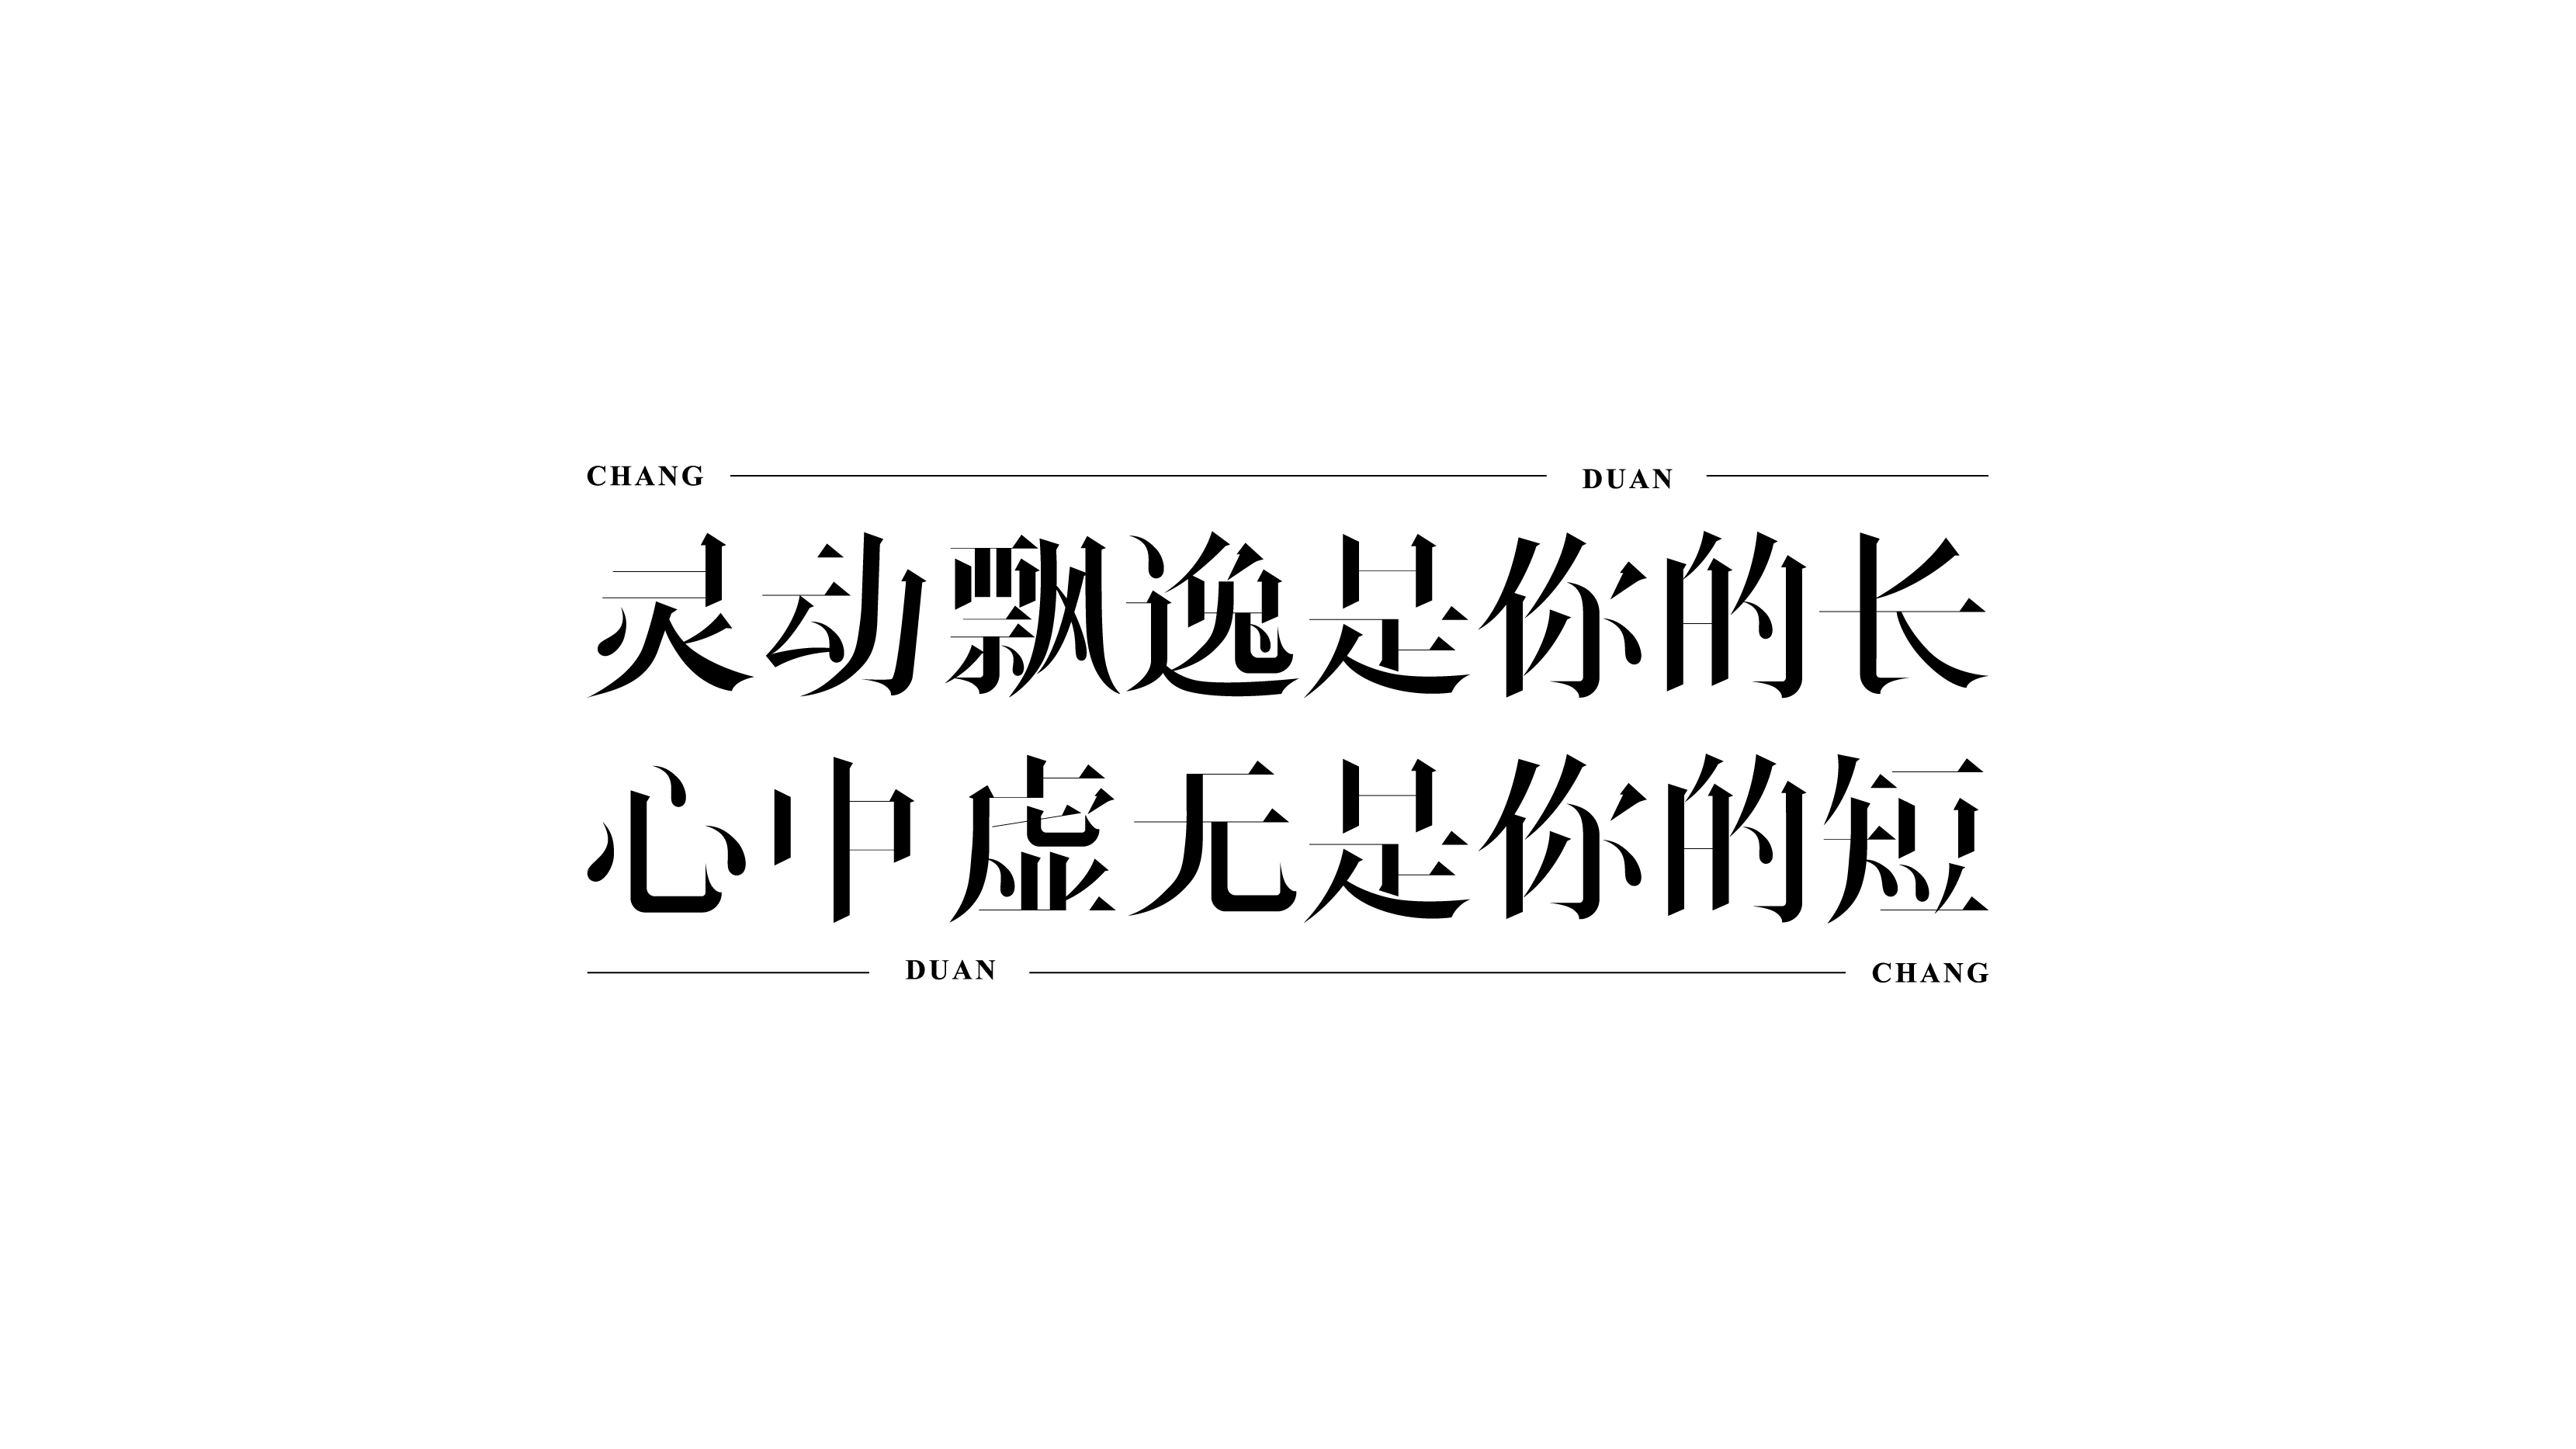 30P Collection of the latest Chinese font design schemes in 2021 #.120